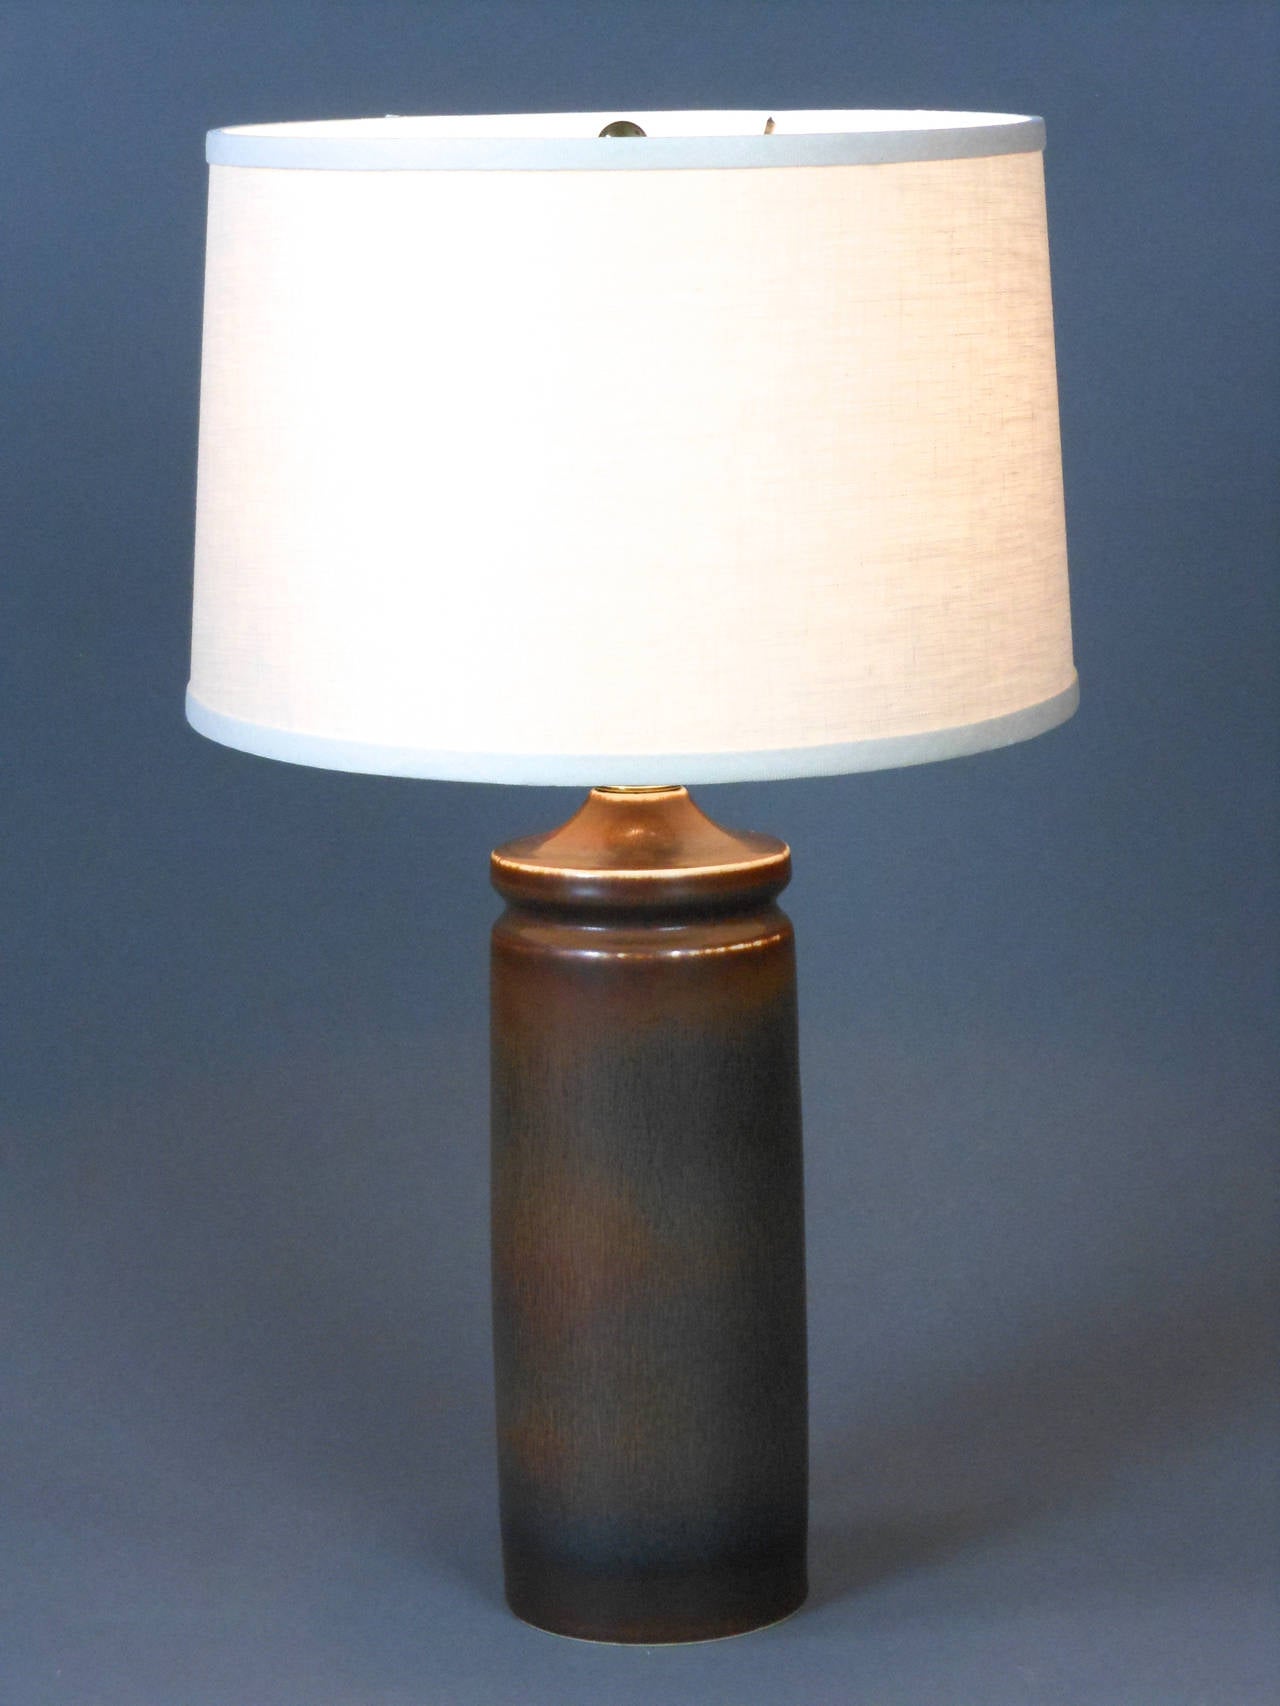 The Swedish modern column-shaped brown earthenware lamp has a domed, banded capital. The lamp is marked on the bottom with the Rörstrand cipher (R with three crowns) and CHS Sweden 241.

Measures: Height to light fitting 12 inches
Height to top of